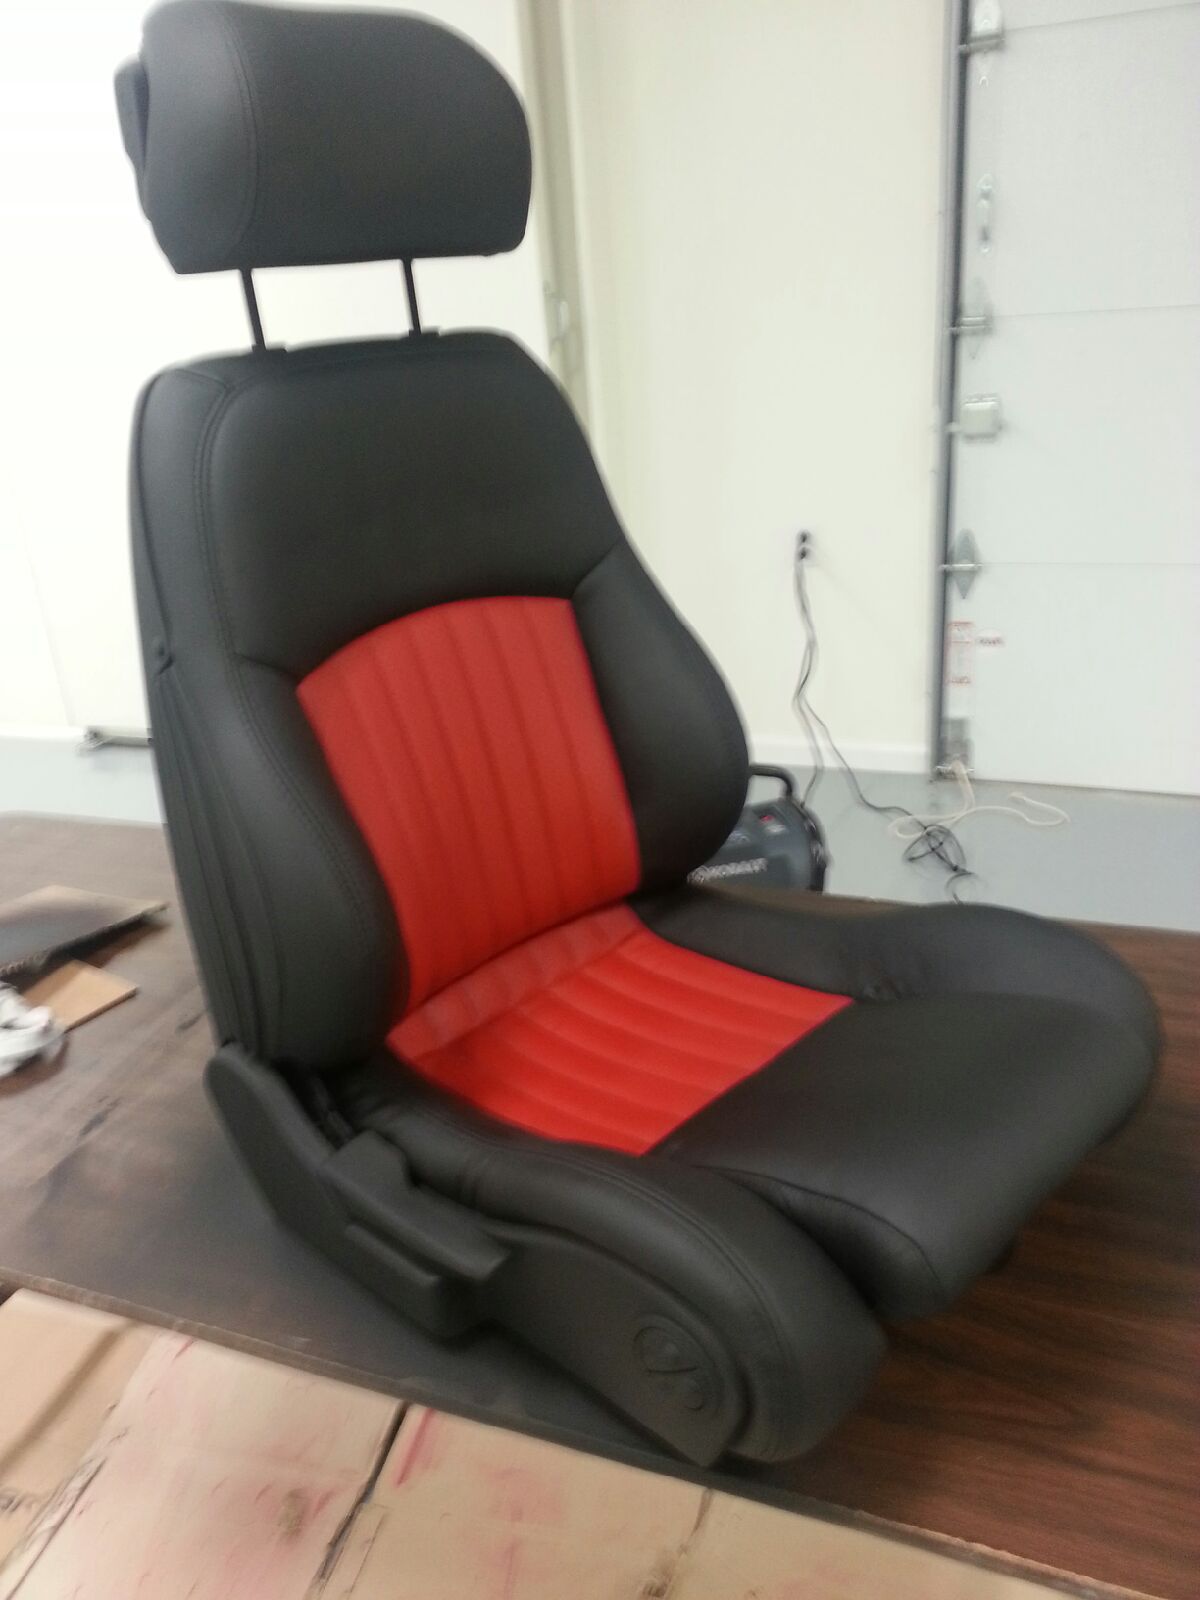 Red Chili Leather & Vinyl Dye, Red Leather Color Restorer